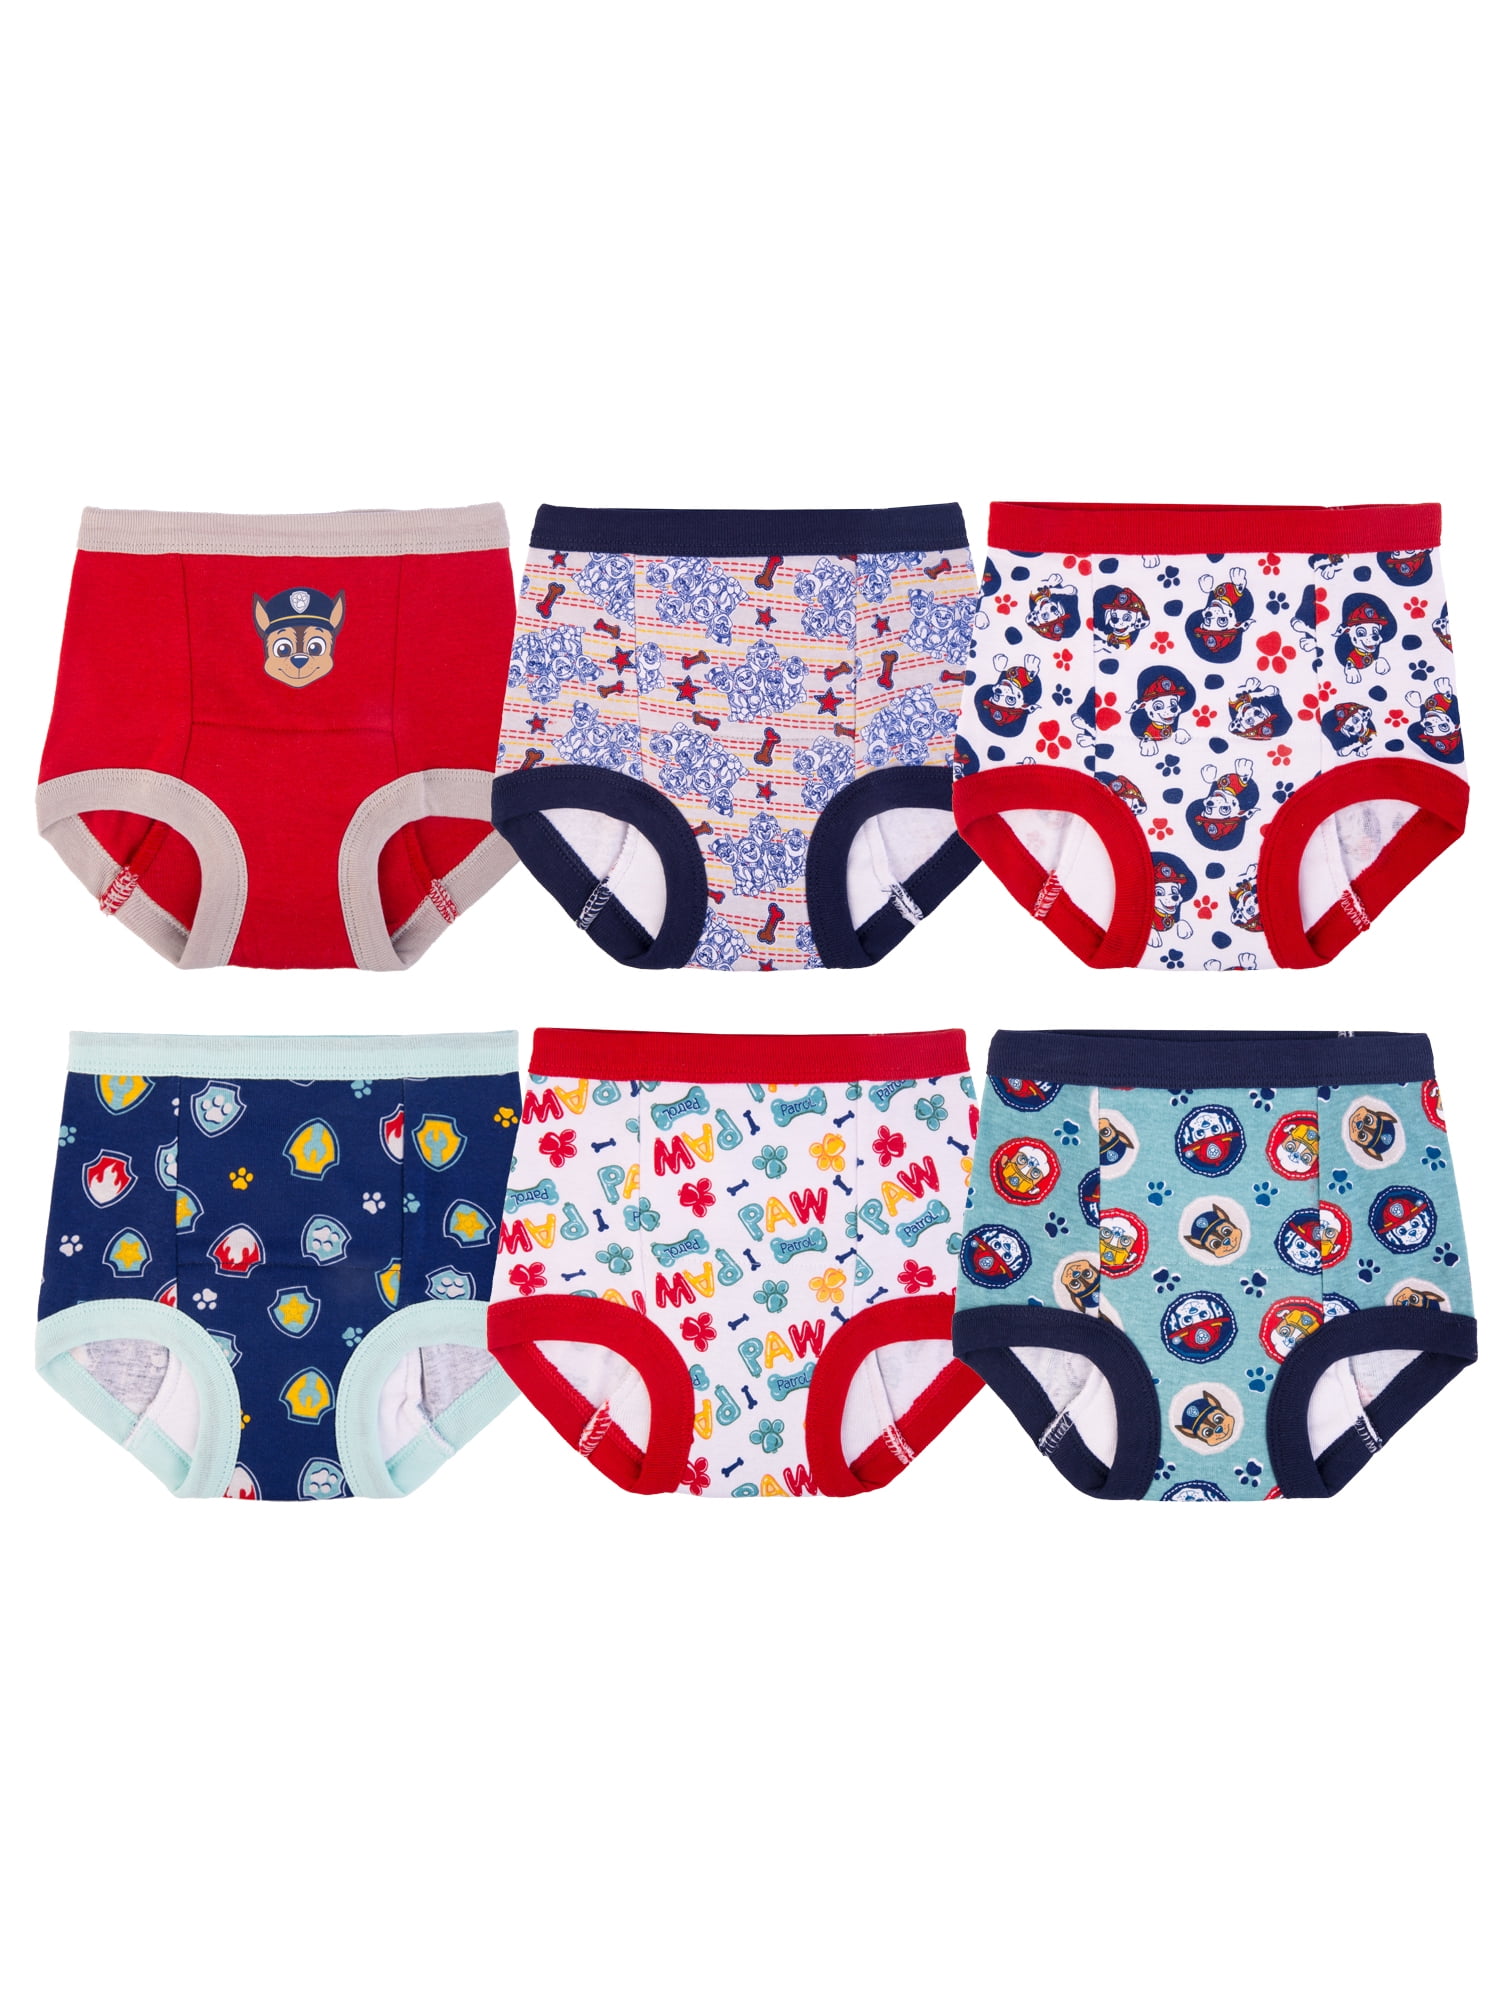 Paw Patrol Boy's Pants Multipack Baby and Toddler Potty Training Underwear  (Pack of 3)